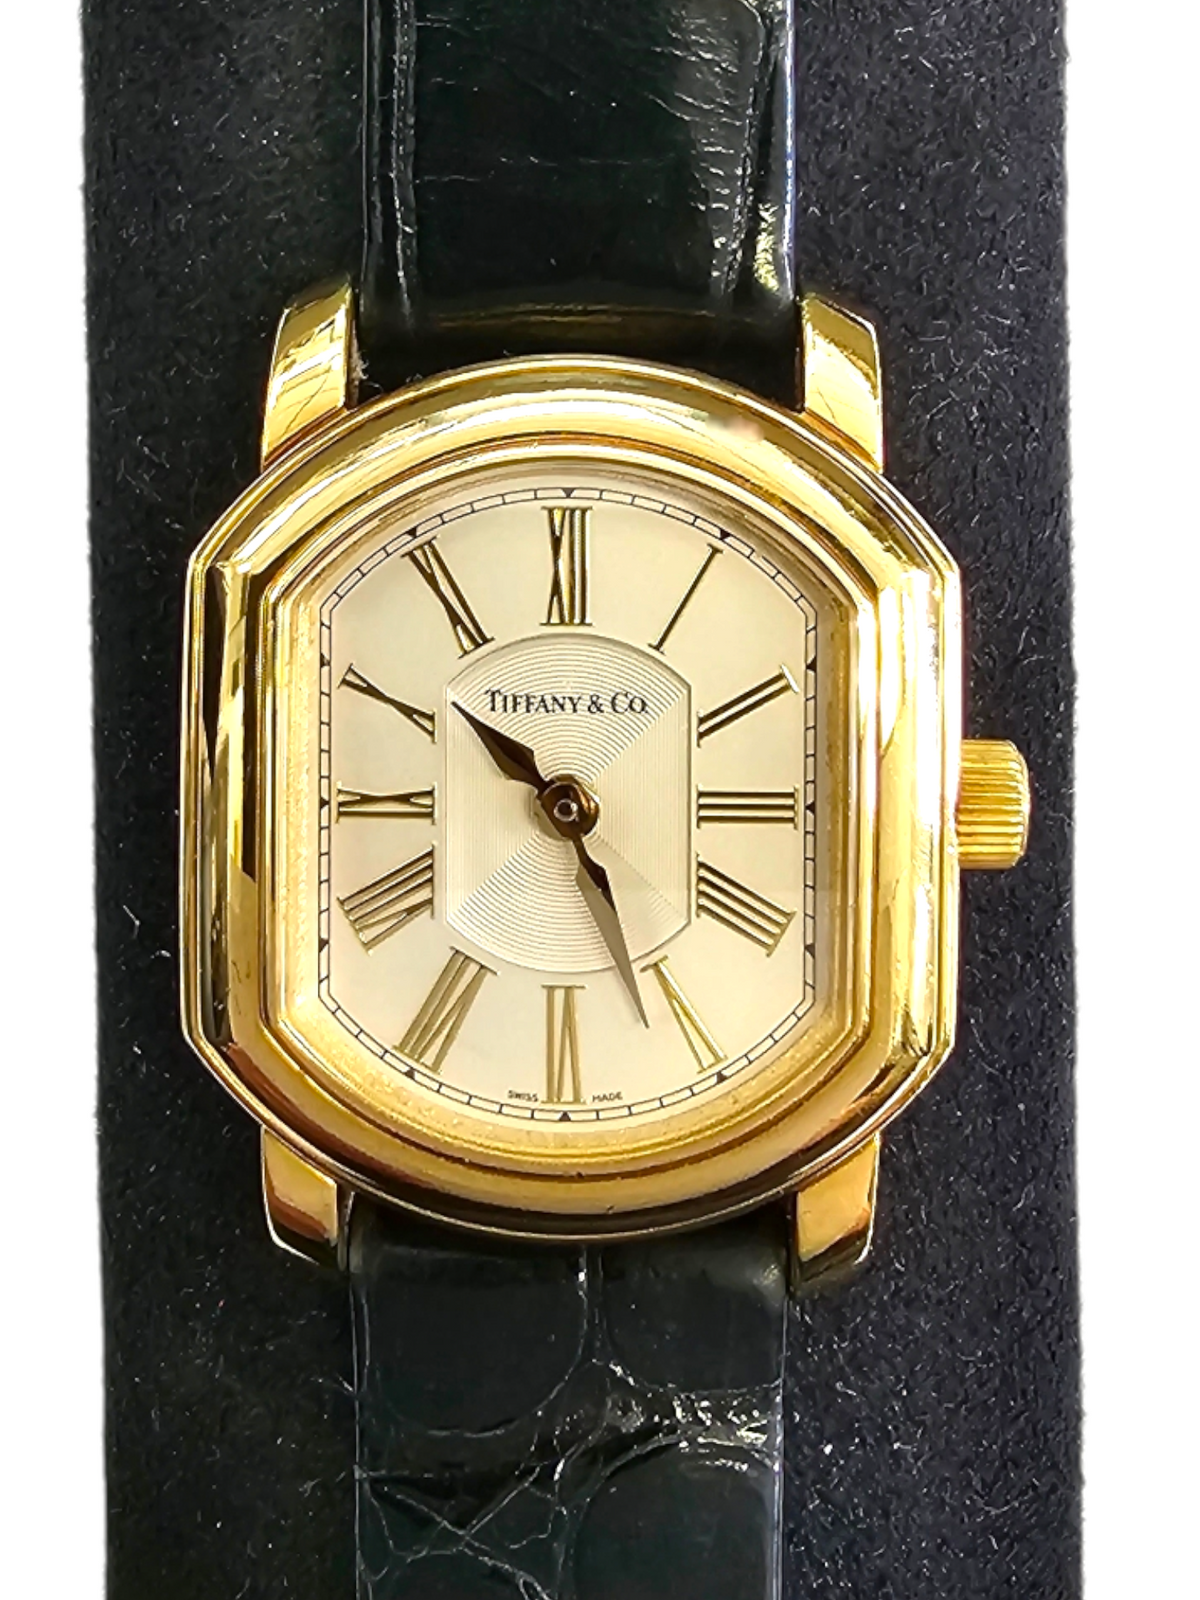 Tiffany & Co Rare Vintage 18kt Yellow Gold Ladies Watch